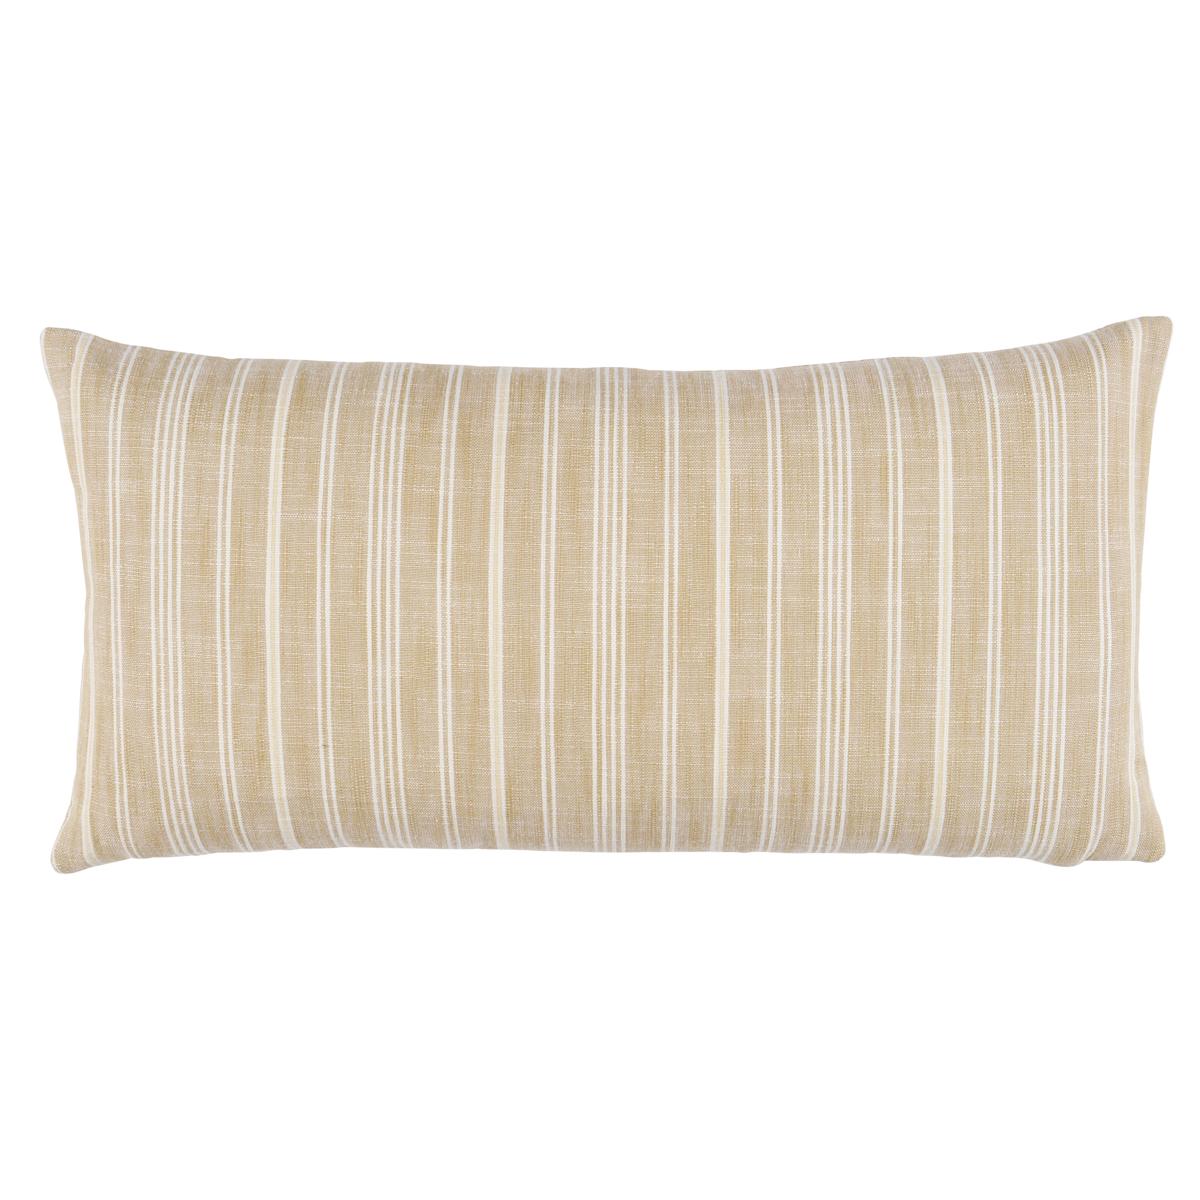 Lucy Stripe Pillow in Neutral 24 x 12"